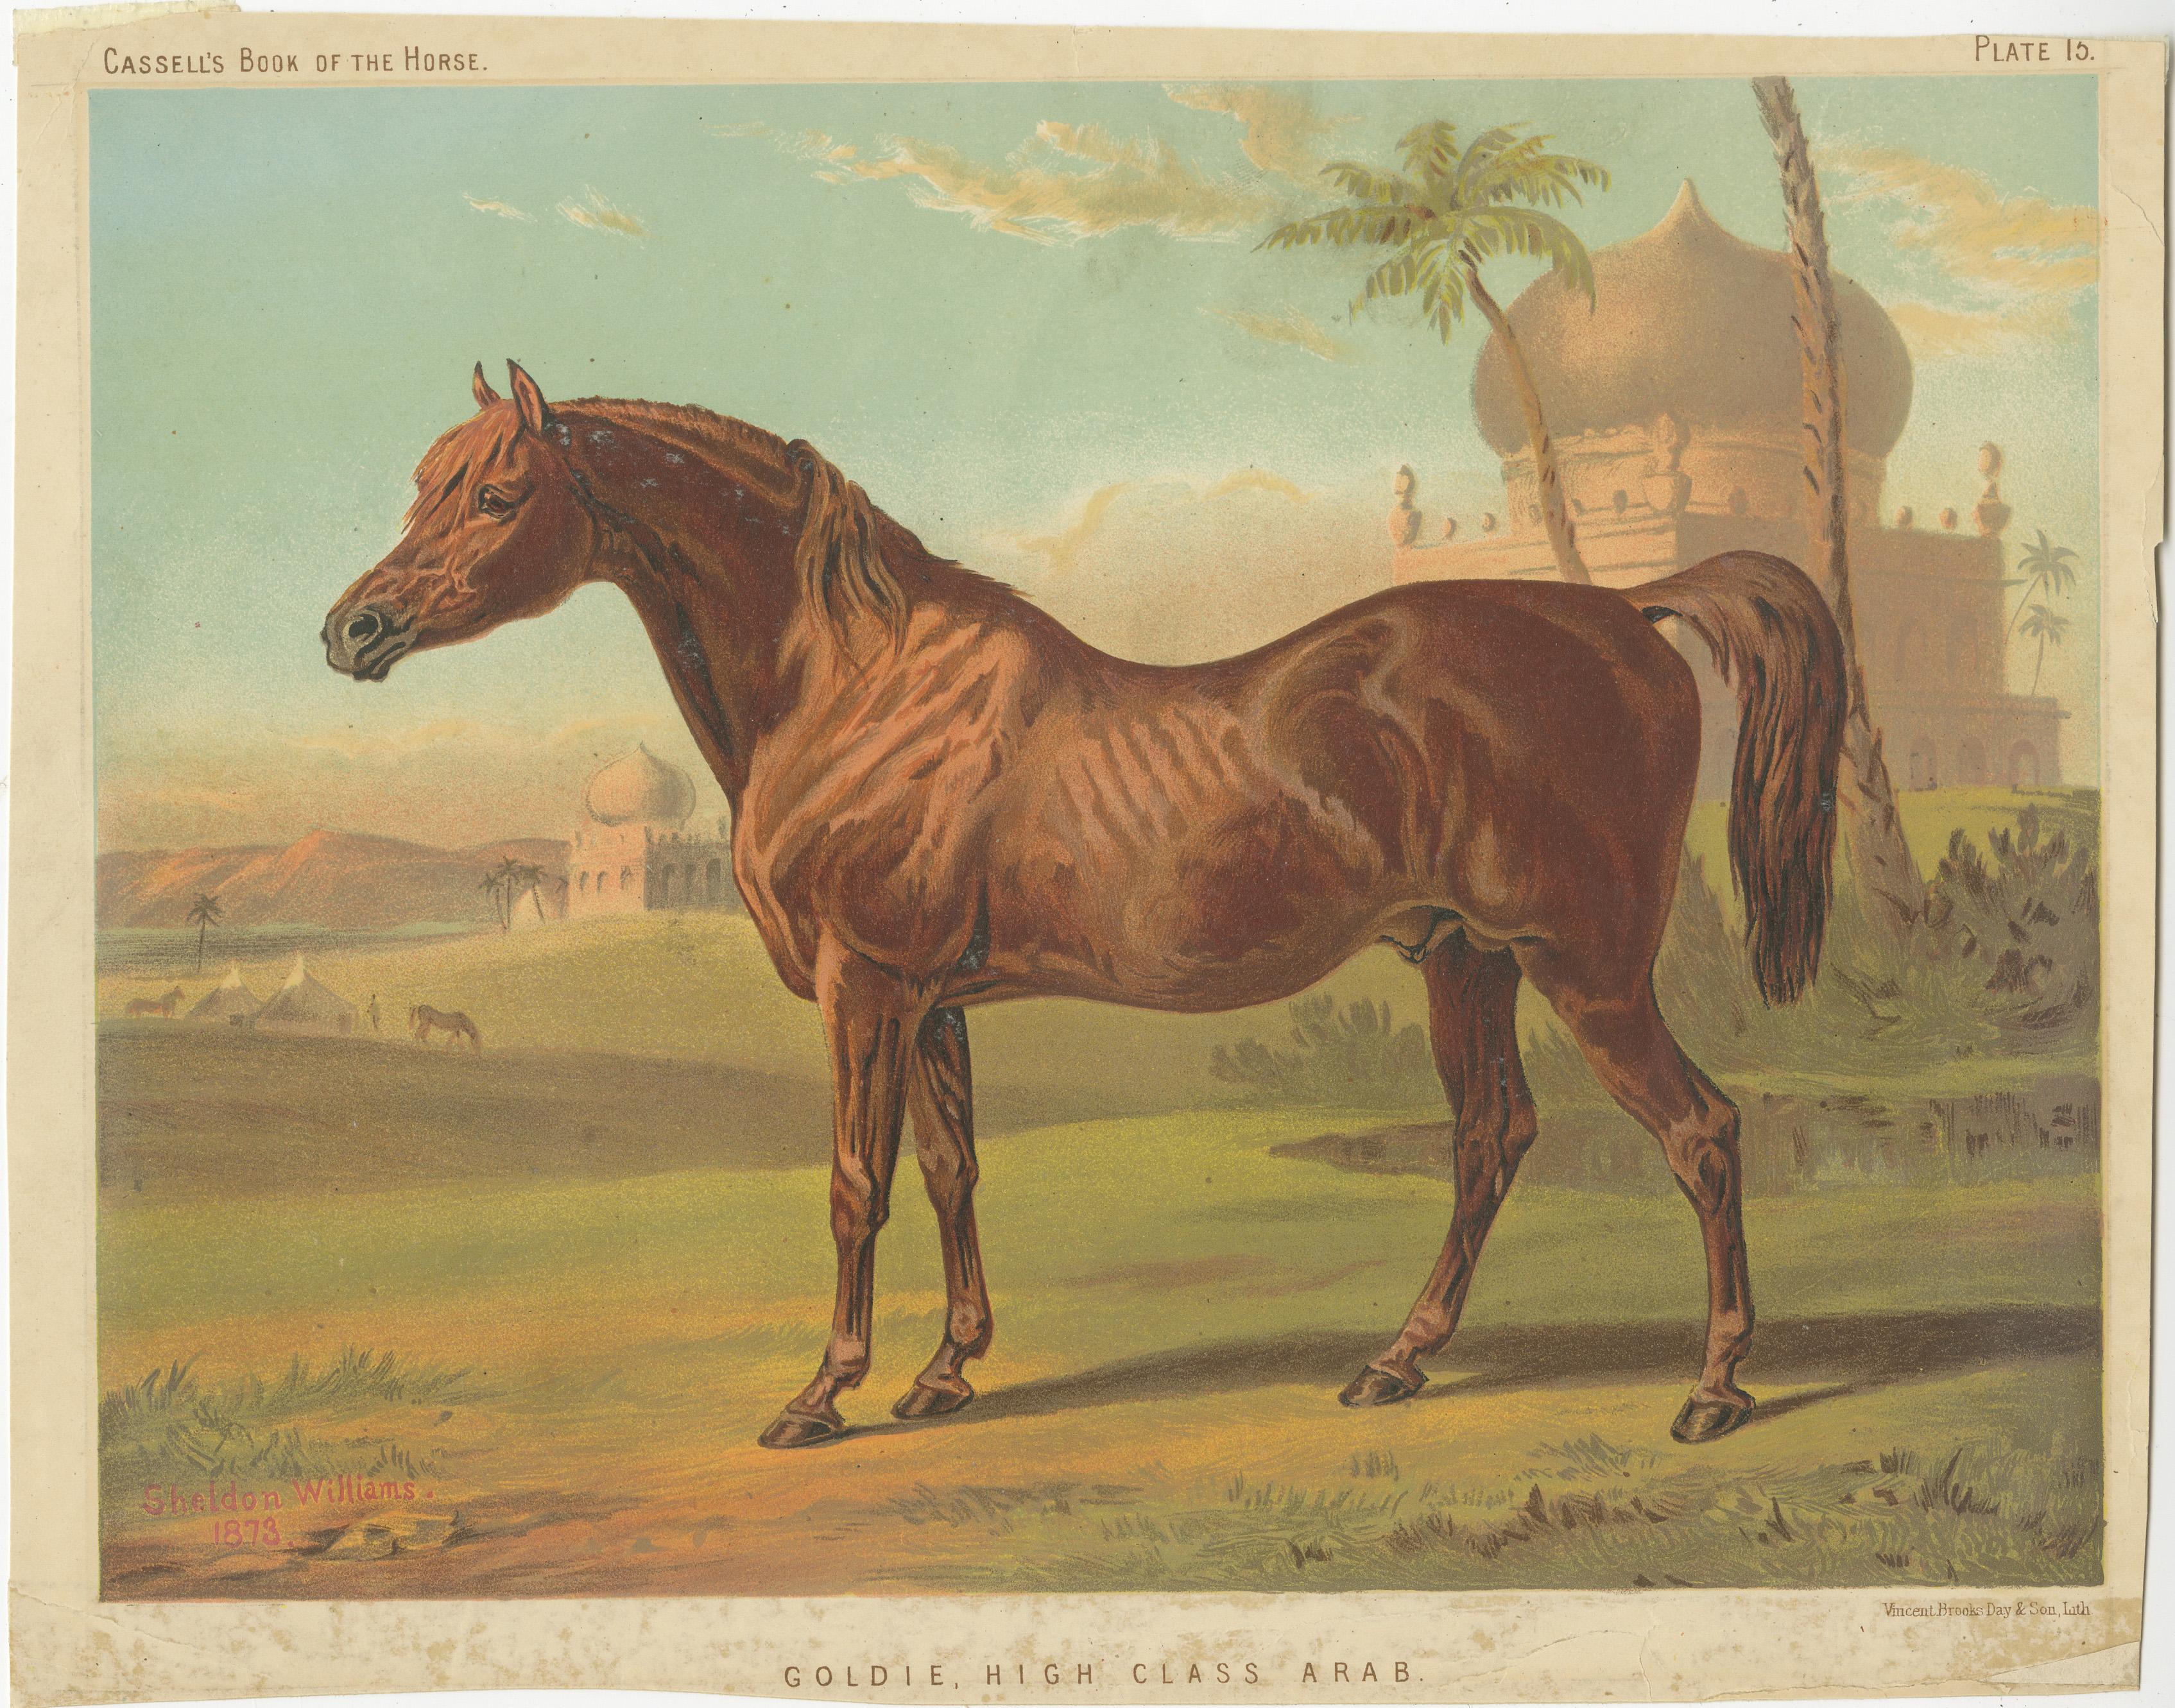 Antique print titled 'Goldie, High Class Arab'. Antique print of Goldie, a high class Arab. Original colour-printed lithograph by Vincent Brooks, Day & Son, after an 1873 oil painting by Sheldon Williams, for Samuel Sidney’s “The Book of the Horse”